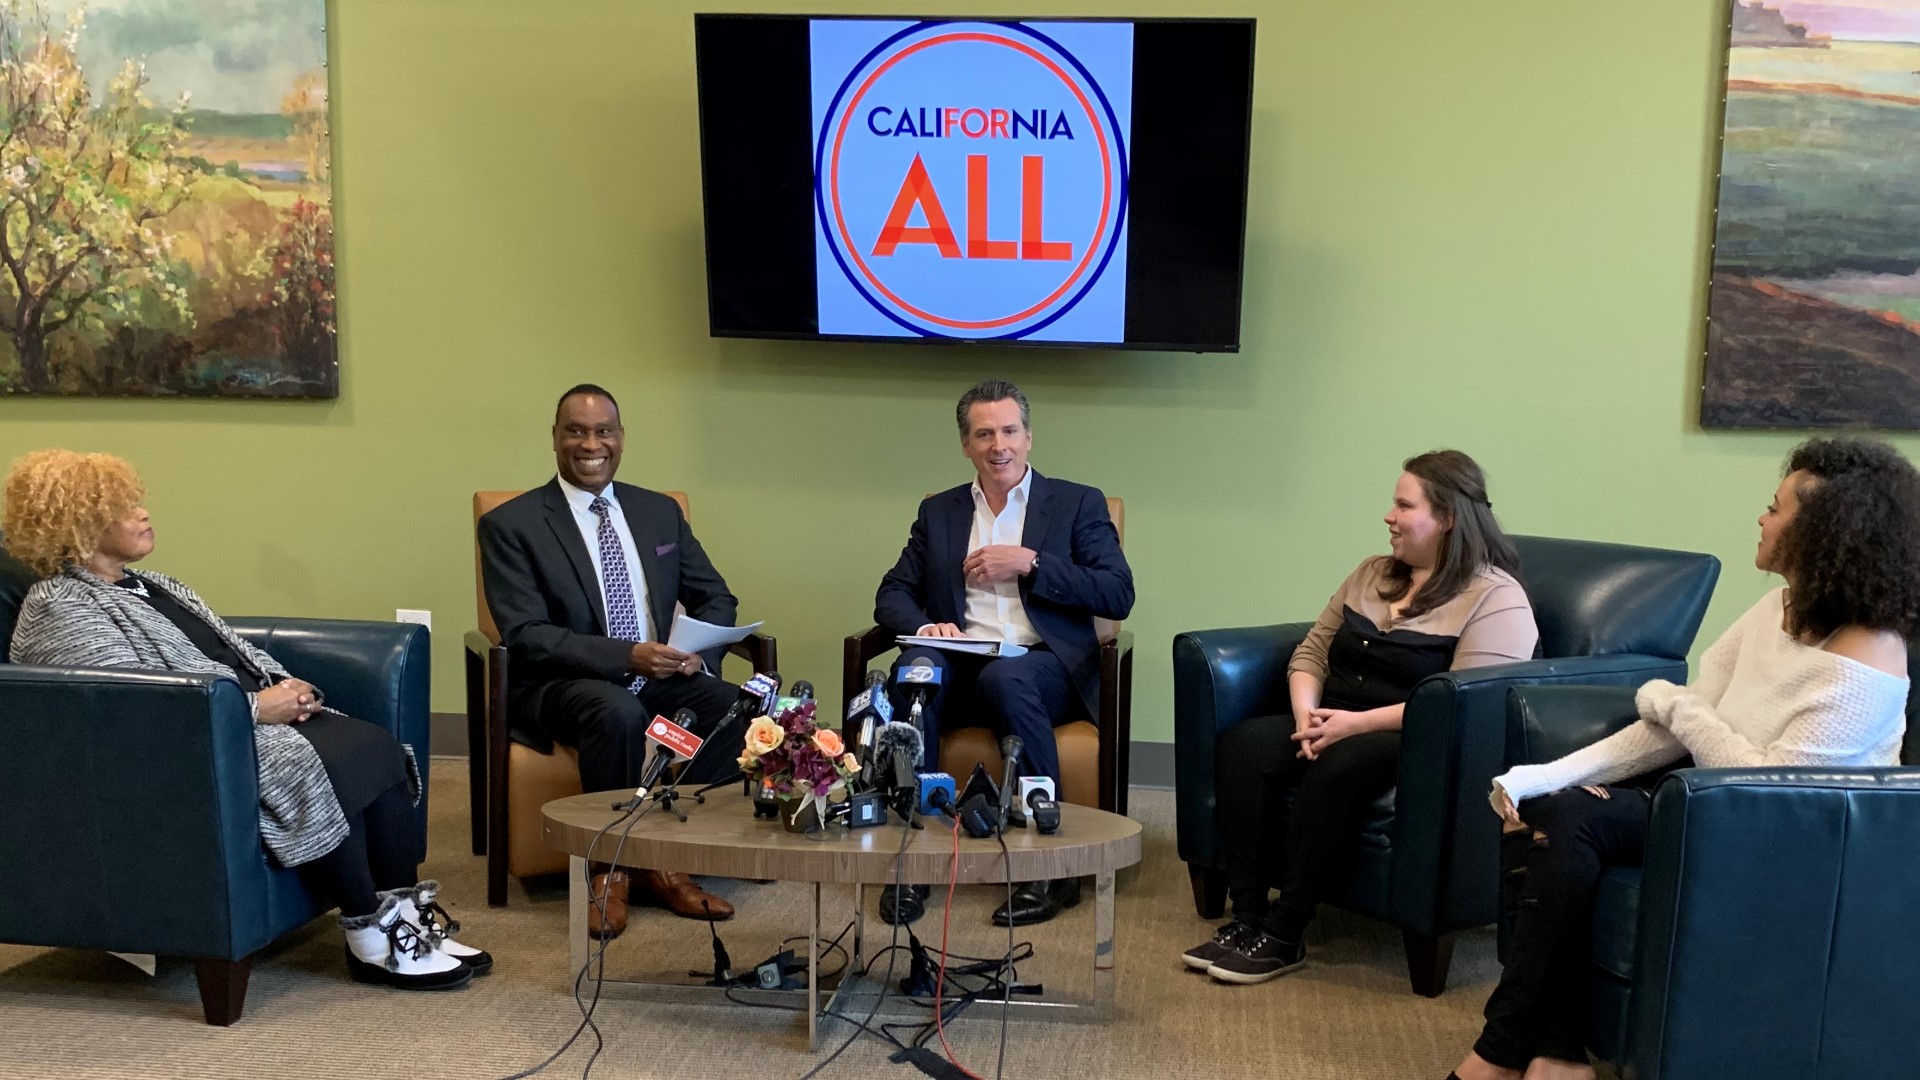 Gov. Gavin Newsom held a roundtable discussion focused on housing and the rising cost of rent in California. Three women invited to the discussion opened up about their struggle with affordable housing.